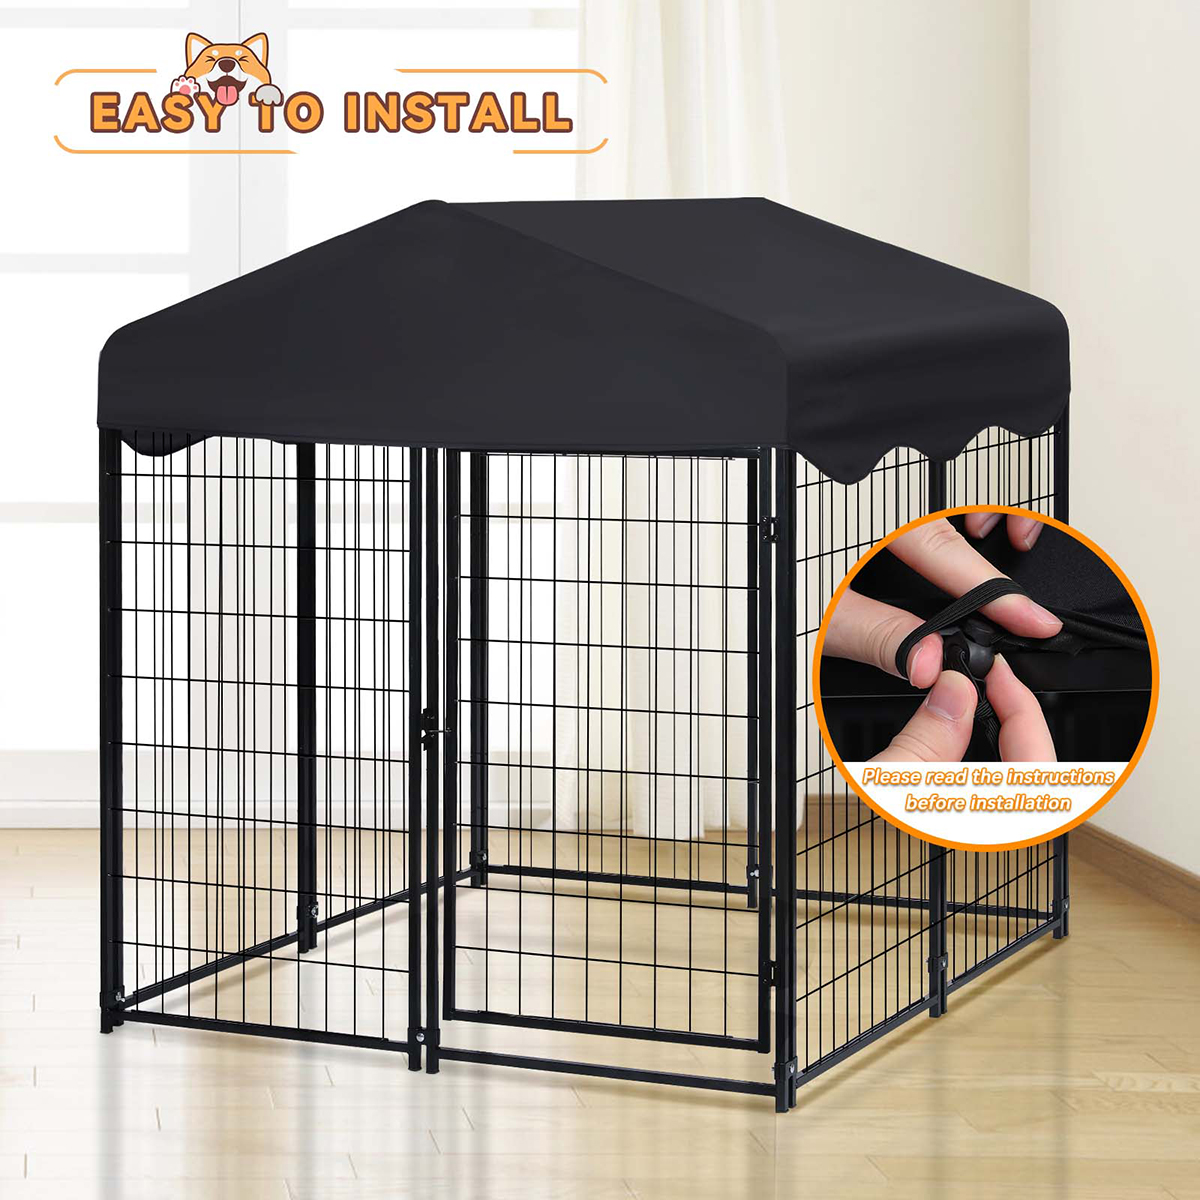 PawGiant Large Dog Kennel Outdoor Dog House with Roof 4ft x 4.2ft x 4.45ft Heavy Duty Metal for Large to Small Dog, Outside Dog Kennel Pet Crate Cage Playpen with UV-Proof Waterproof Cover